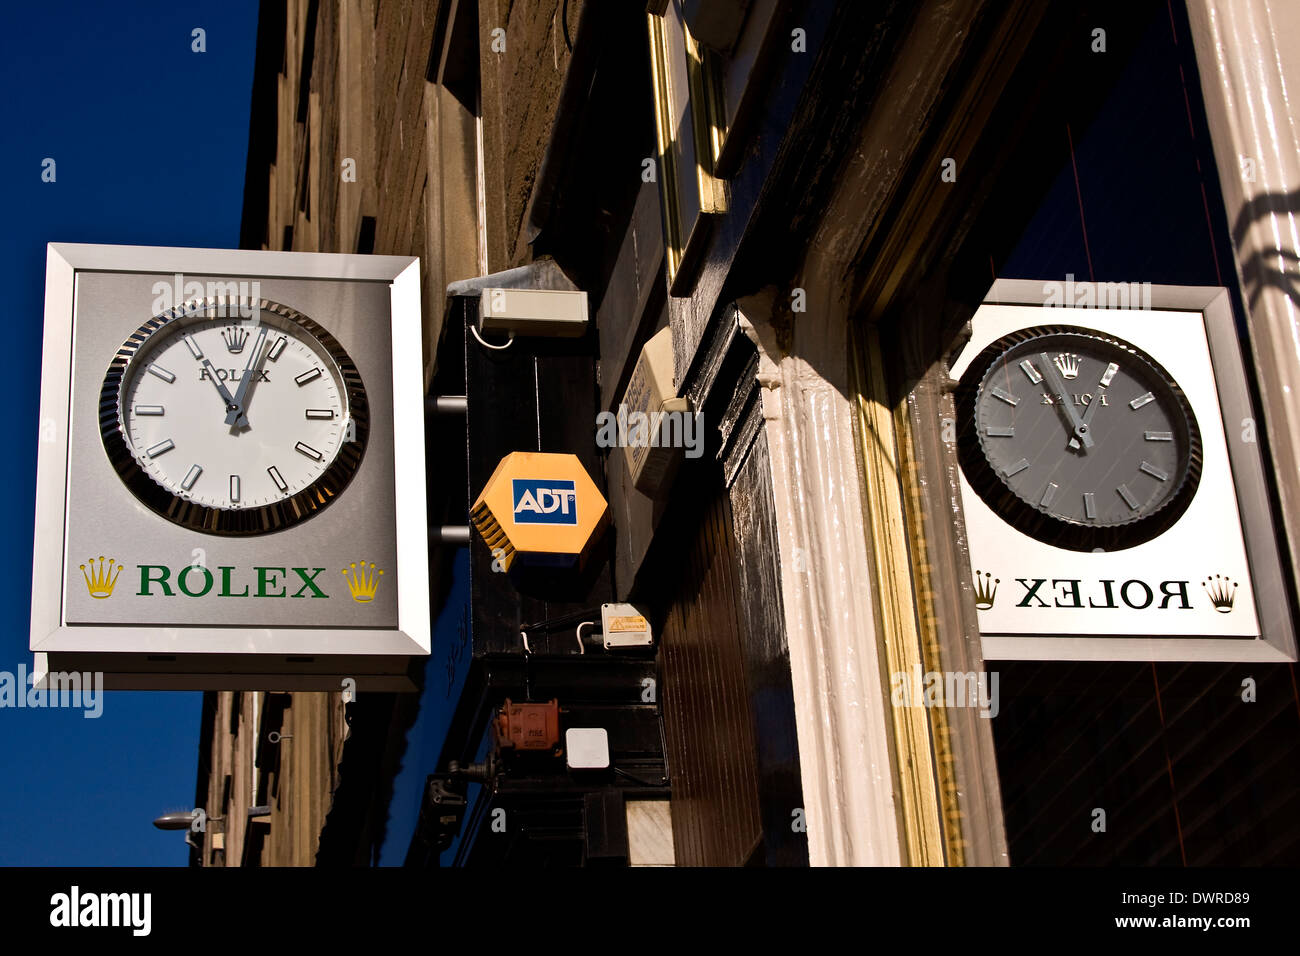 A ROLEX clock showing that the time is Three minutes past Eleven Ante Meridian in Dundee, UK Stock Photo